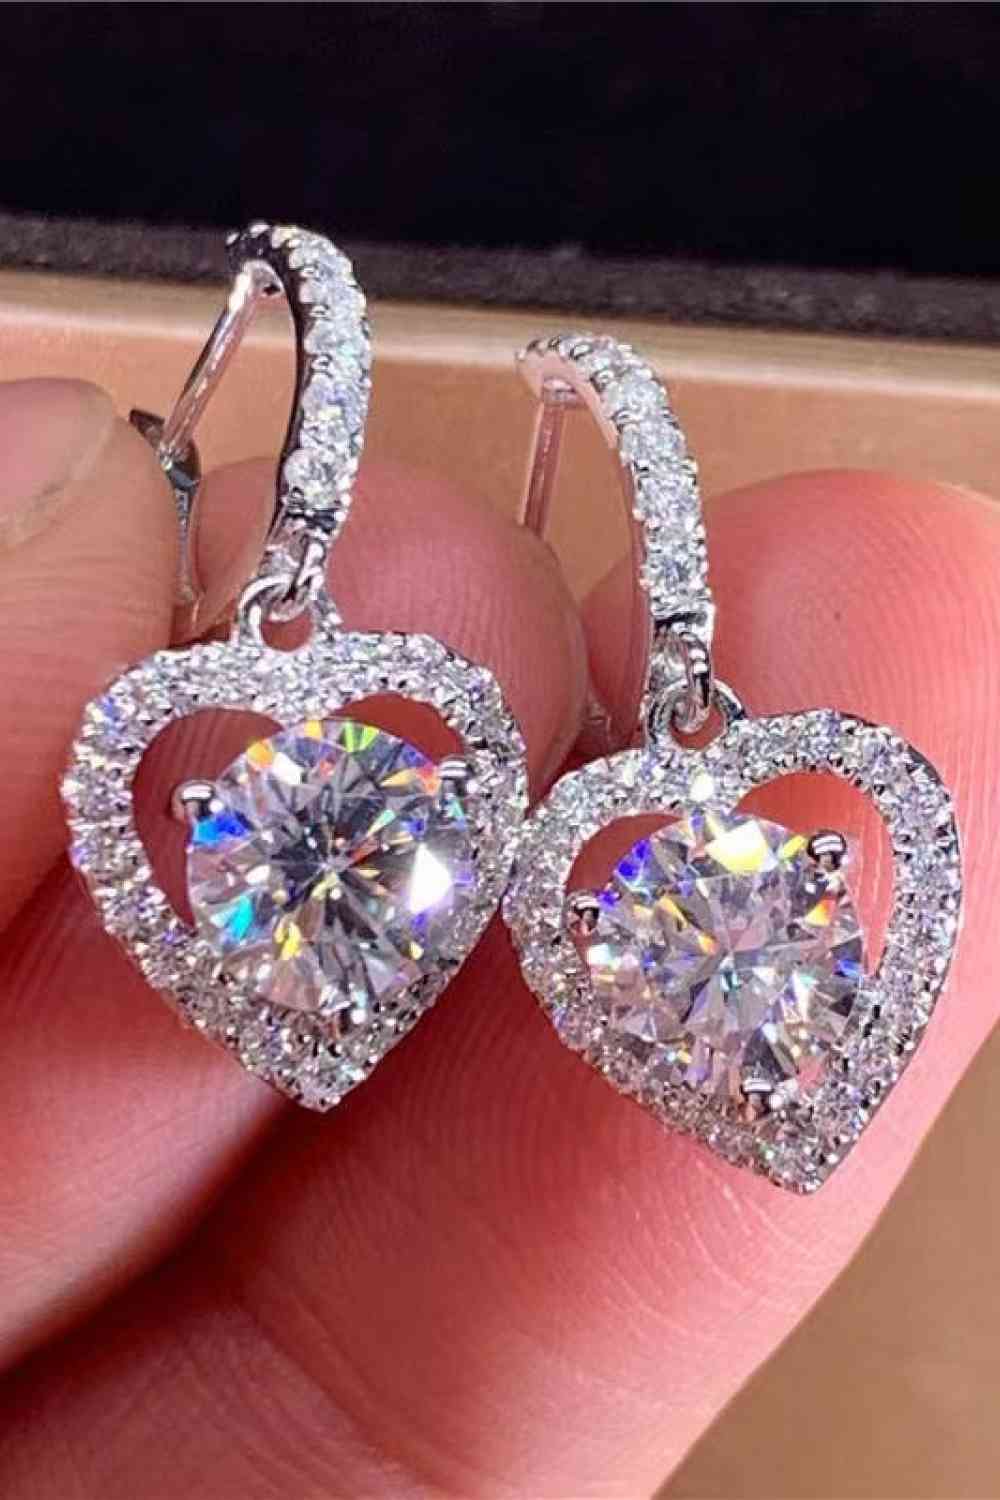 Clear Moissanite heart earrings with zircon accent stones set in platinum plated sterling silver